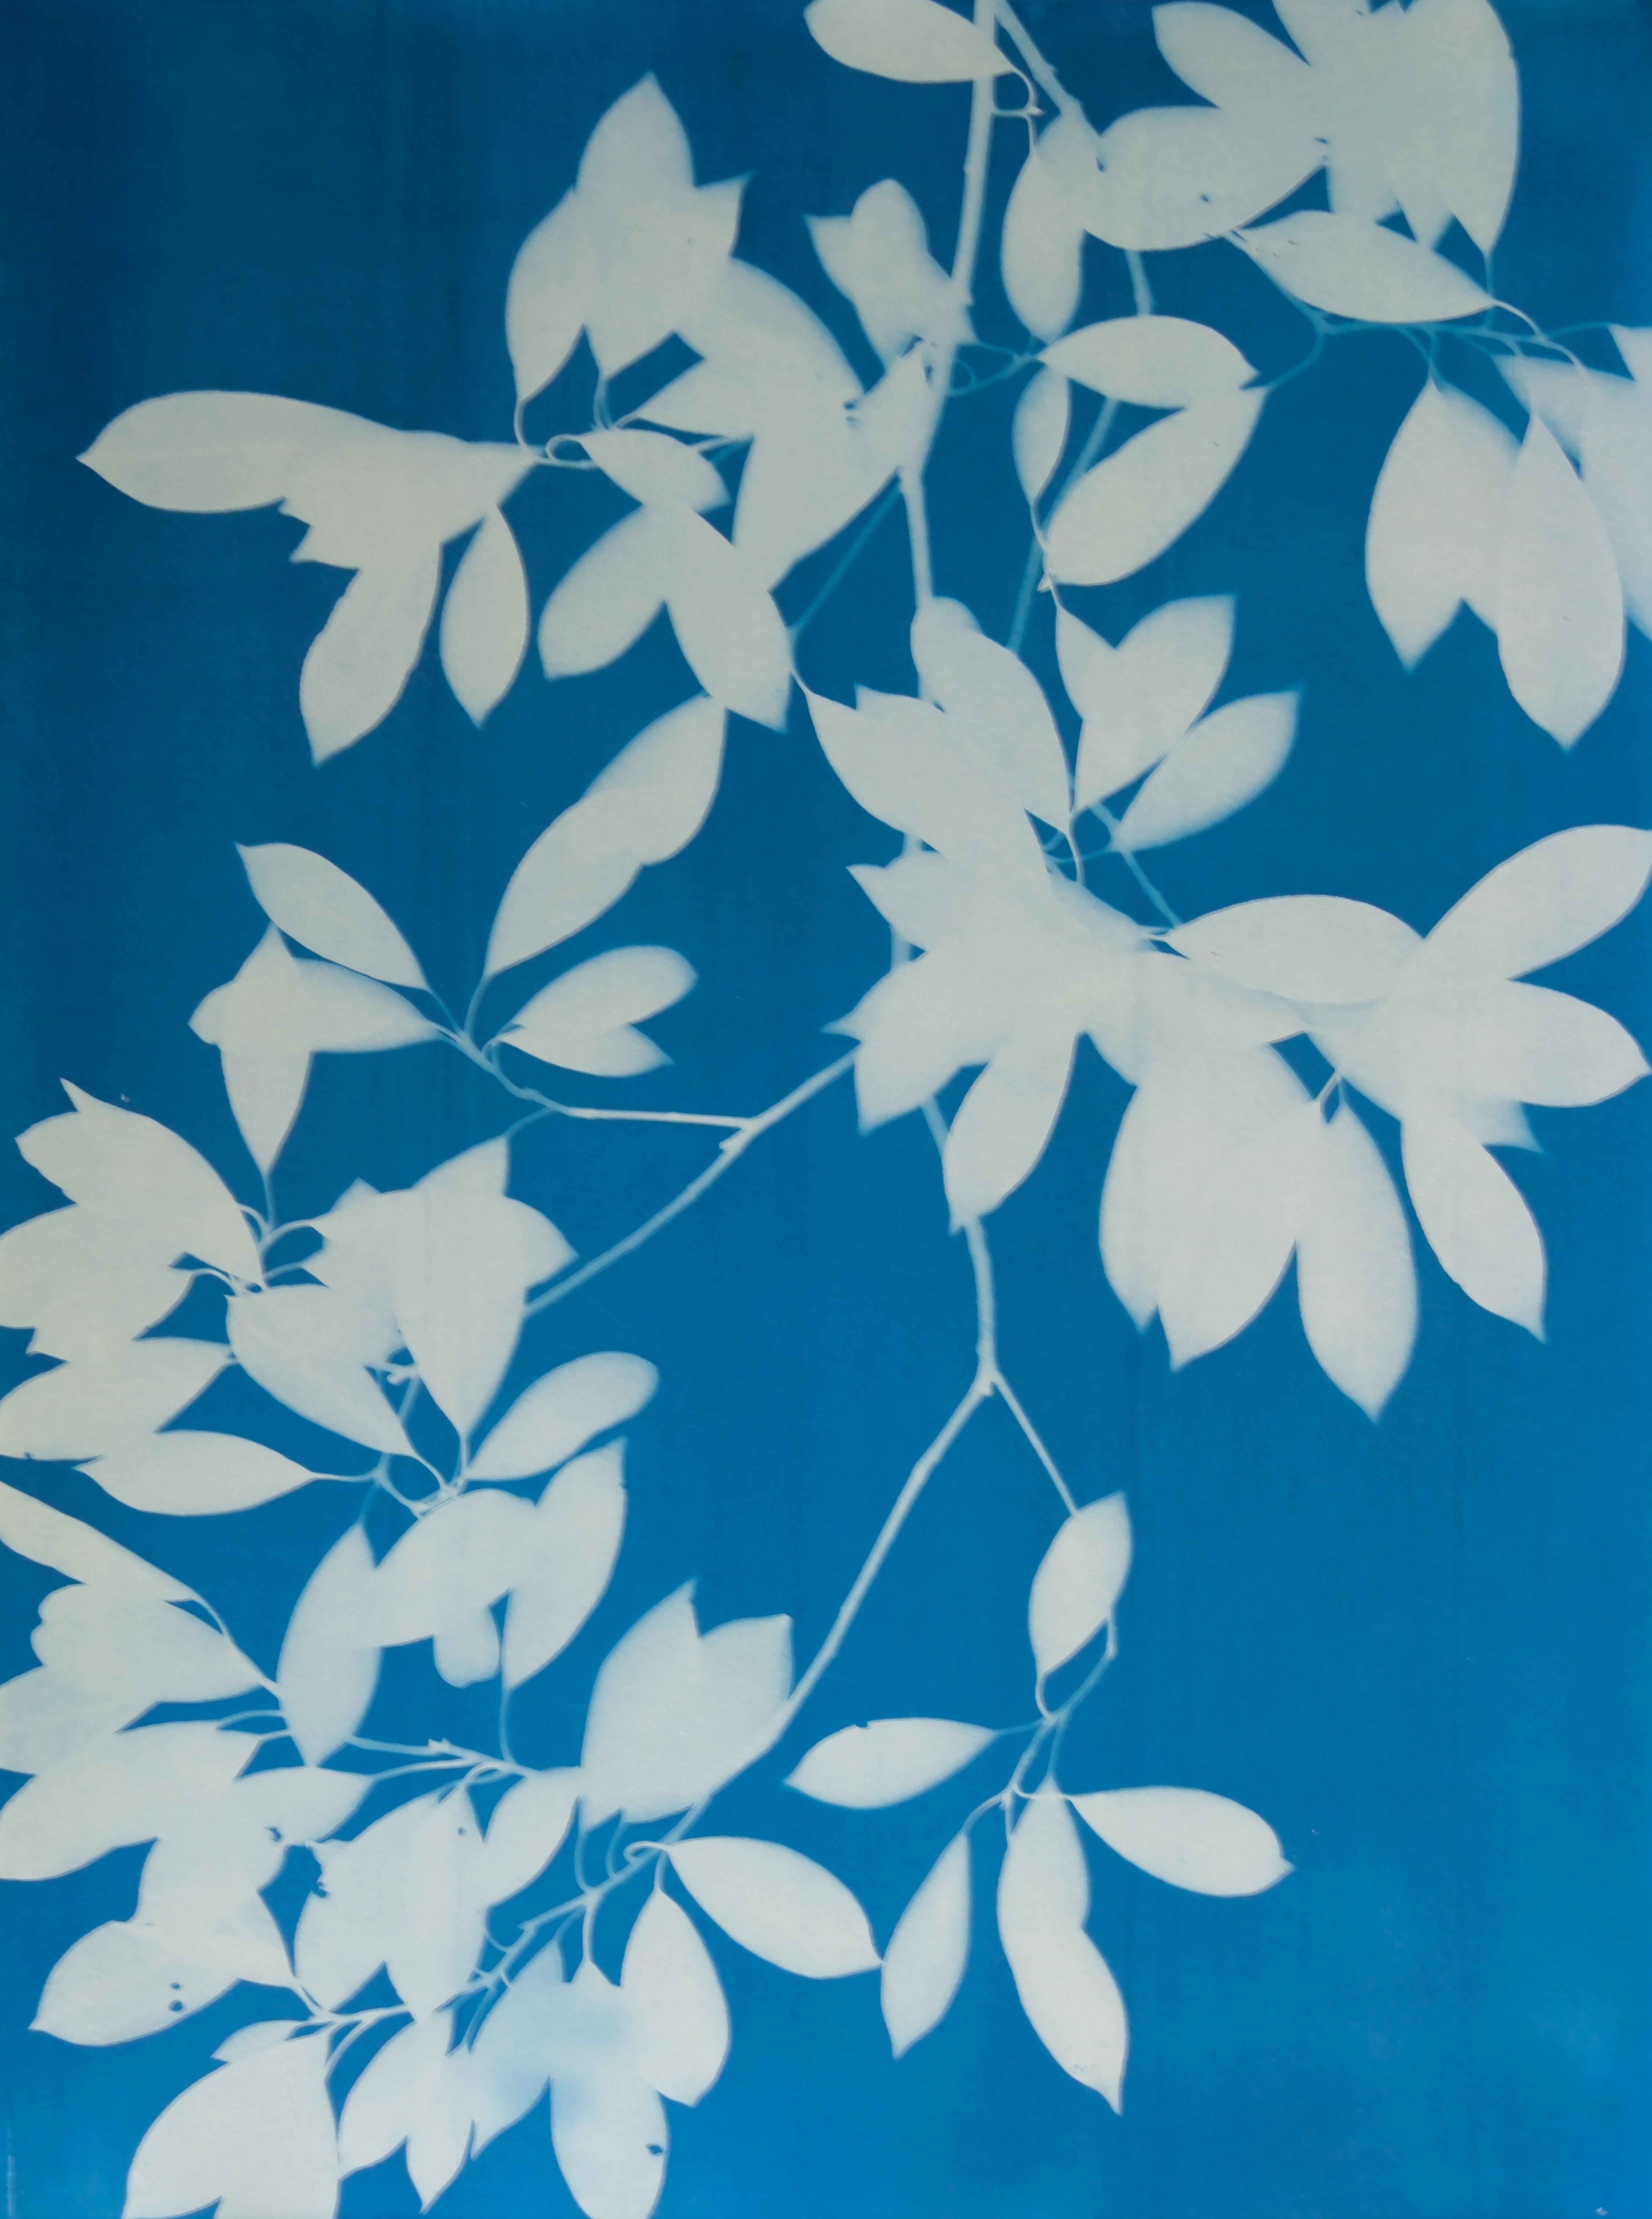 Evening Shade Triptych (3 hand-printed botanical cyanotypes, 30 x 22 in. each) - Contemporary Print by Christine So